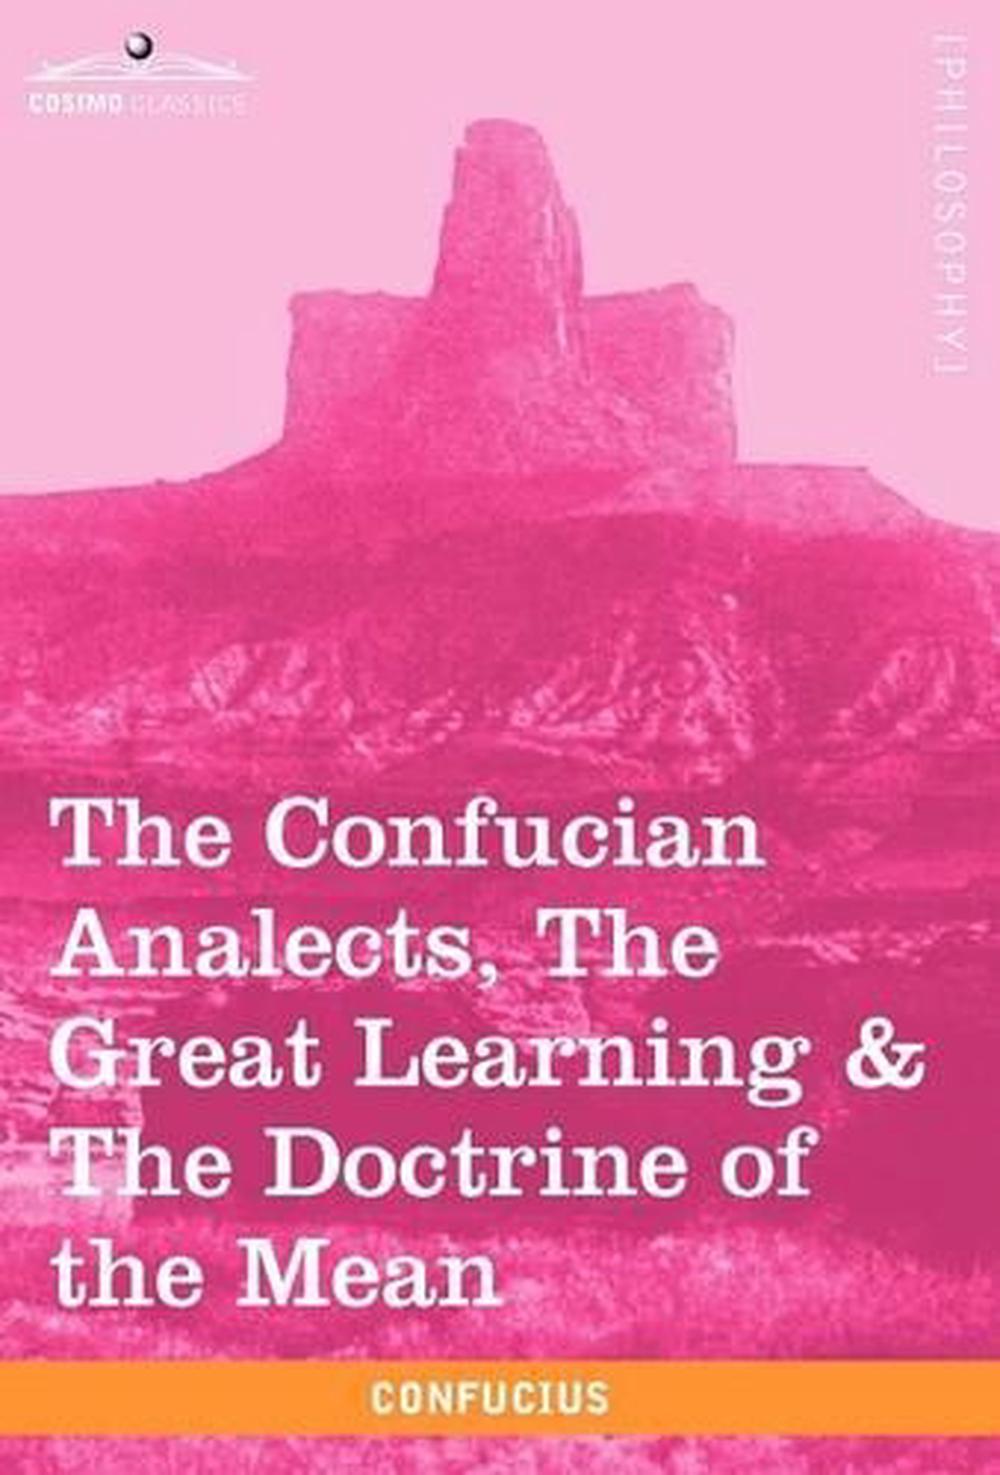 the great learning confucius meaning